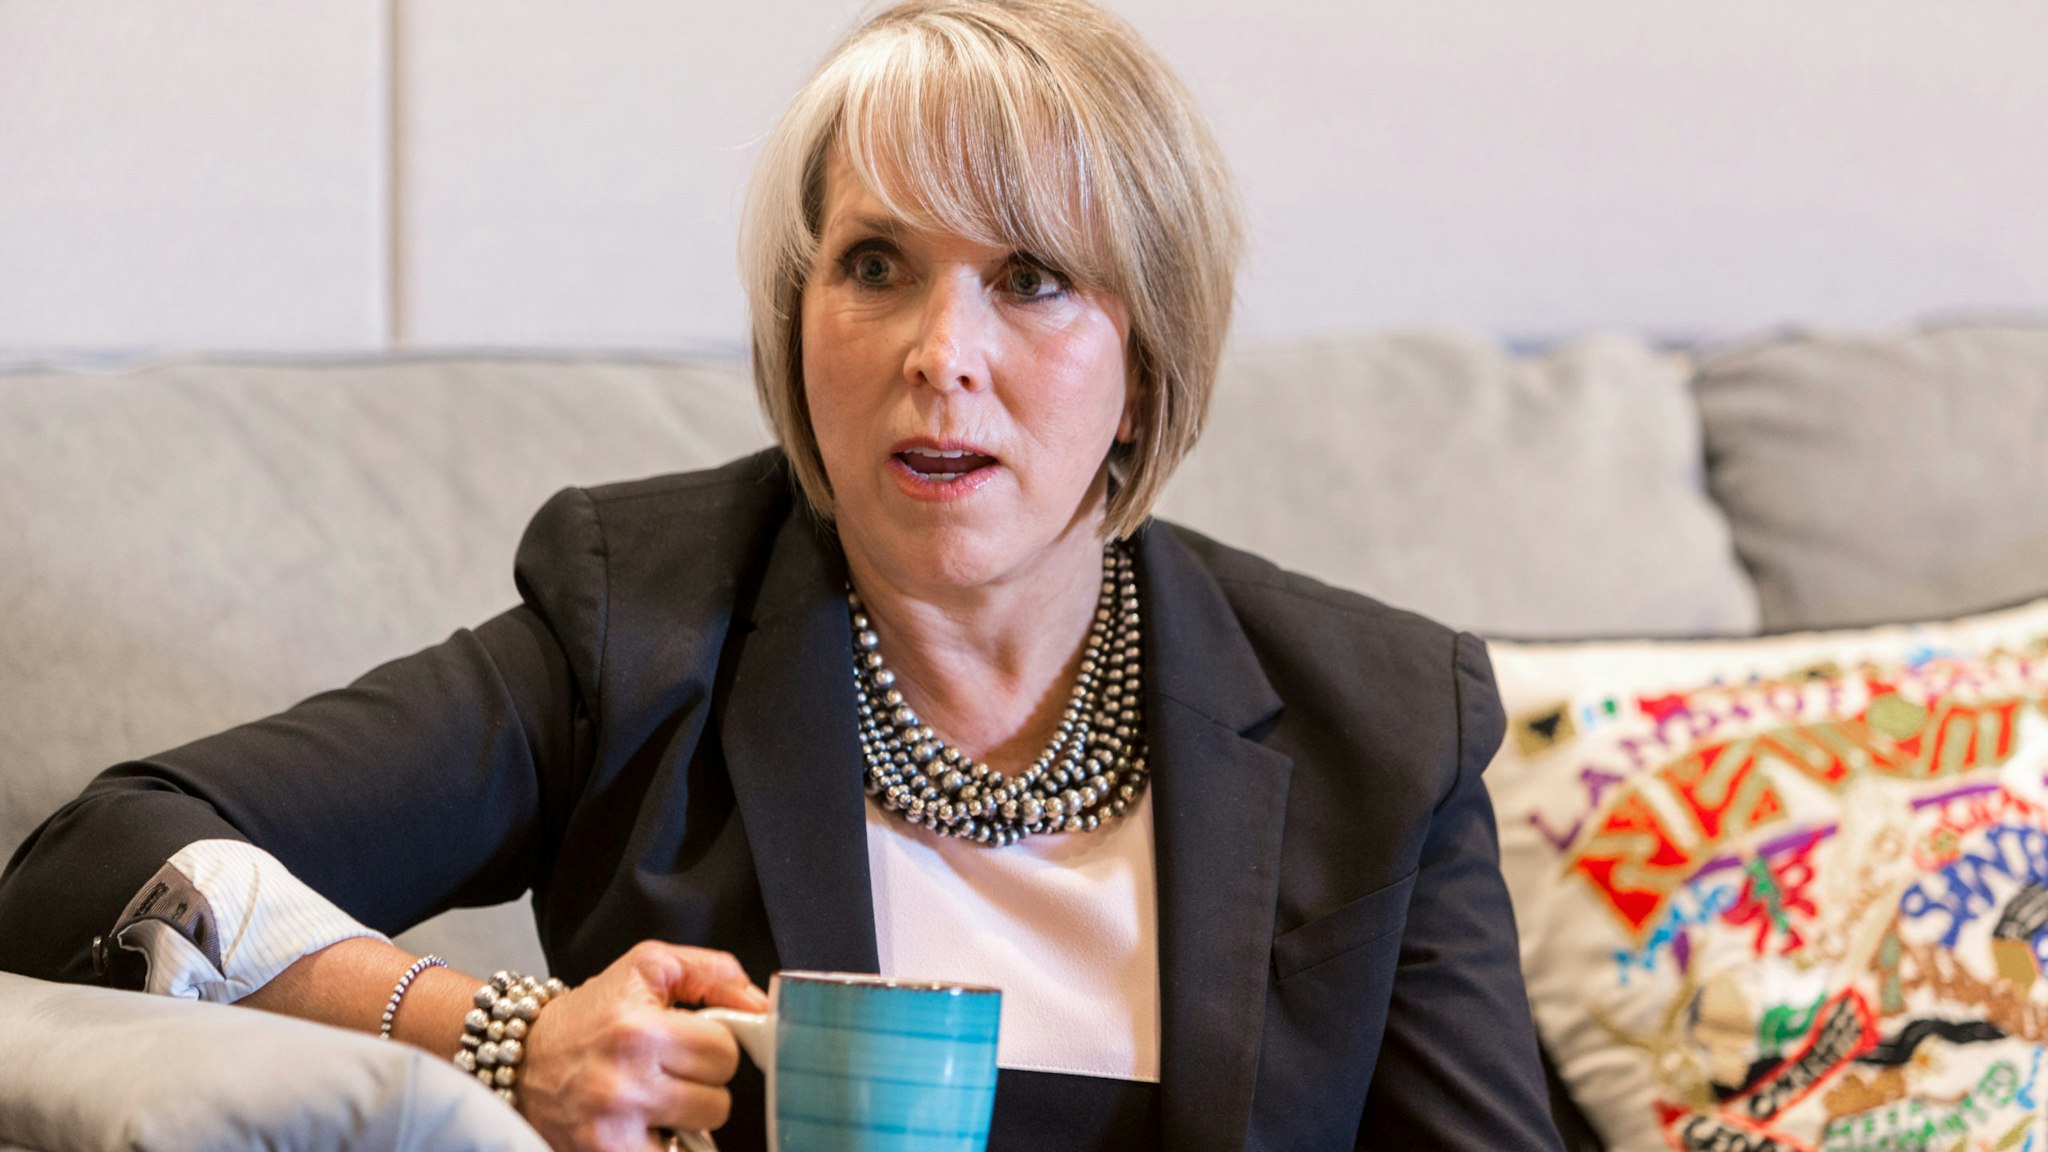 Michelle Lujan Grisham, governor of New Mexico, speaks during an interview at her office in Santa Fe, New Mexico, U.S., on Thursday, Aug. 8, 2019. Lujan Grisham is balancing her concern over the catastrophic effects of climate change with the state's extraordinary dependence on oil and gas.